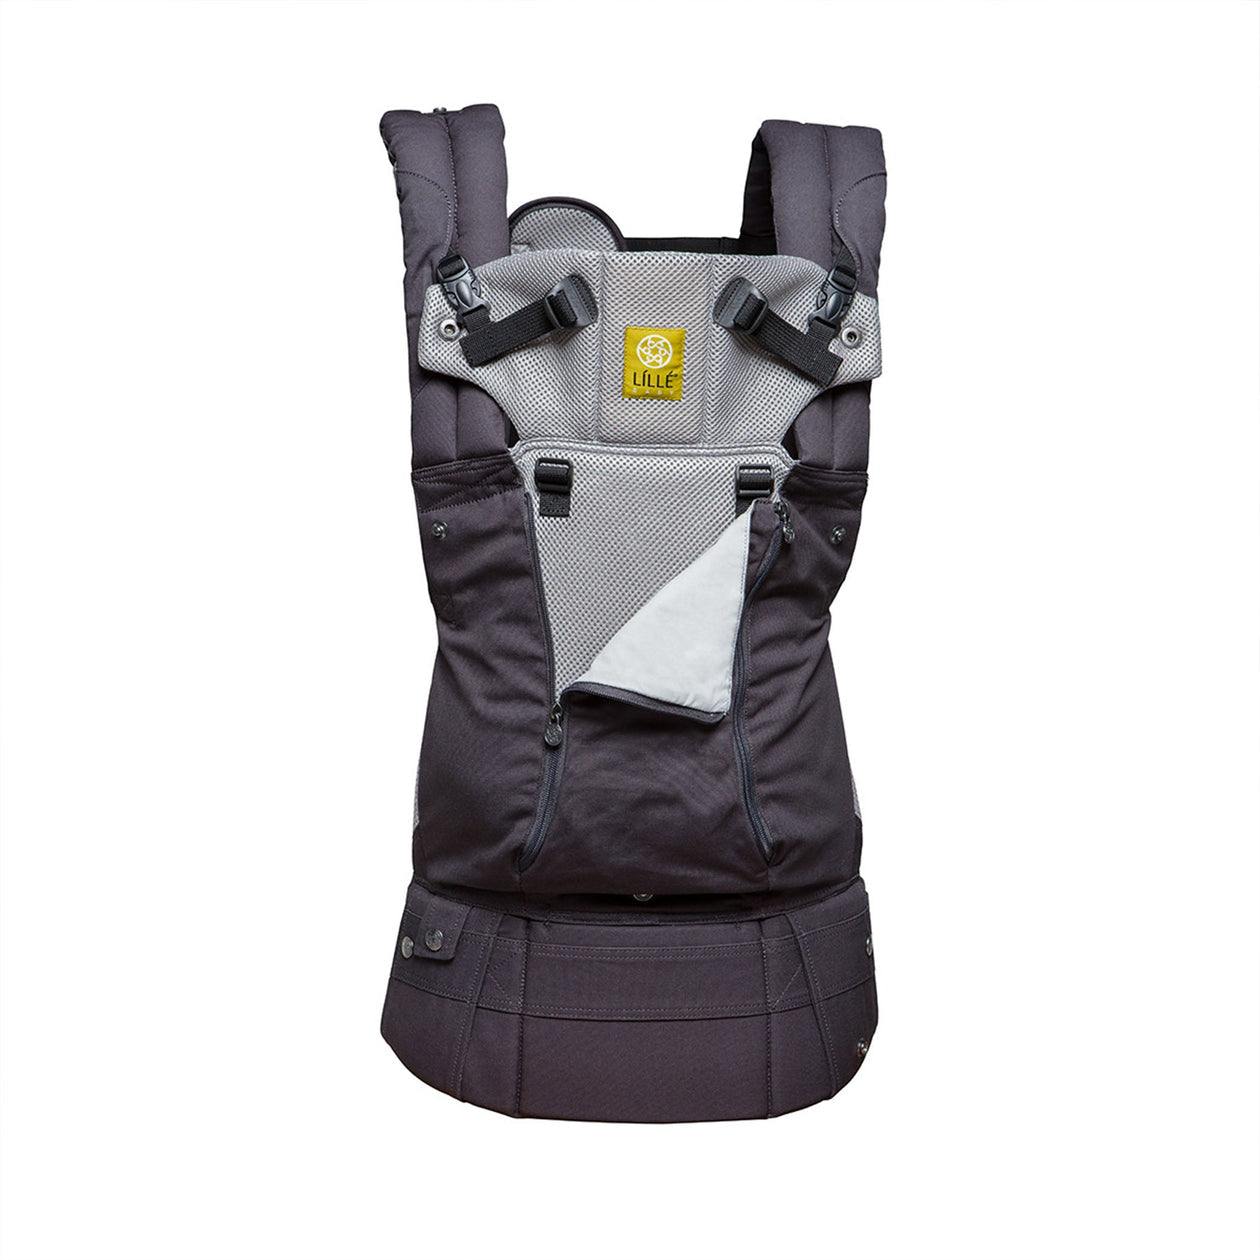 lillebaby complete all seasons baby carrier in charcoal silver